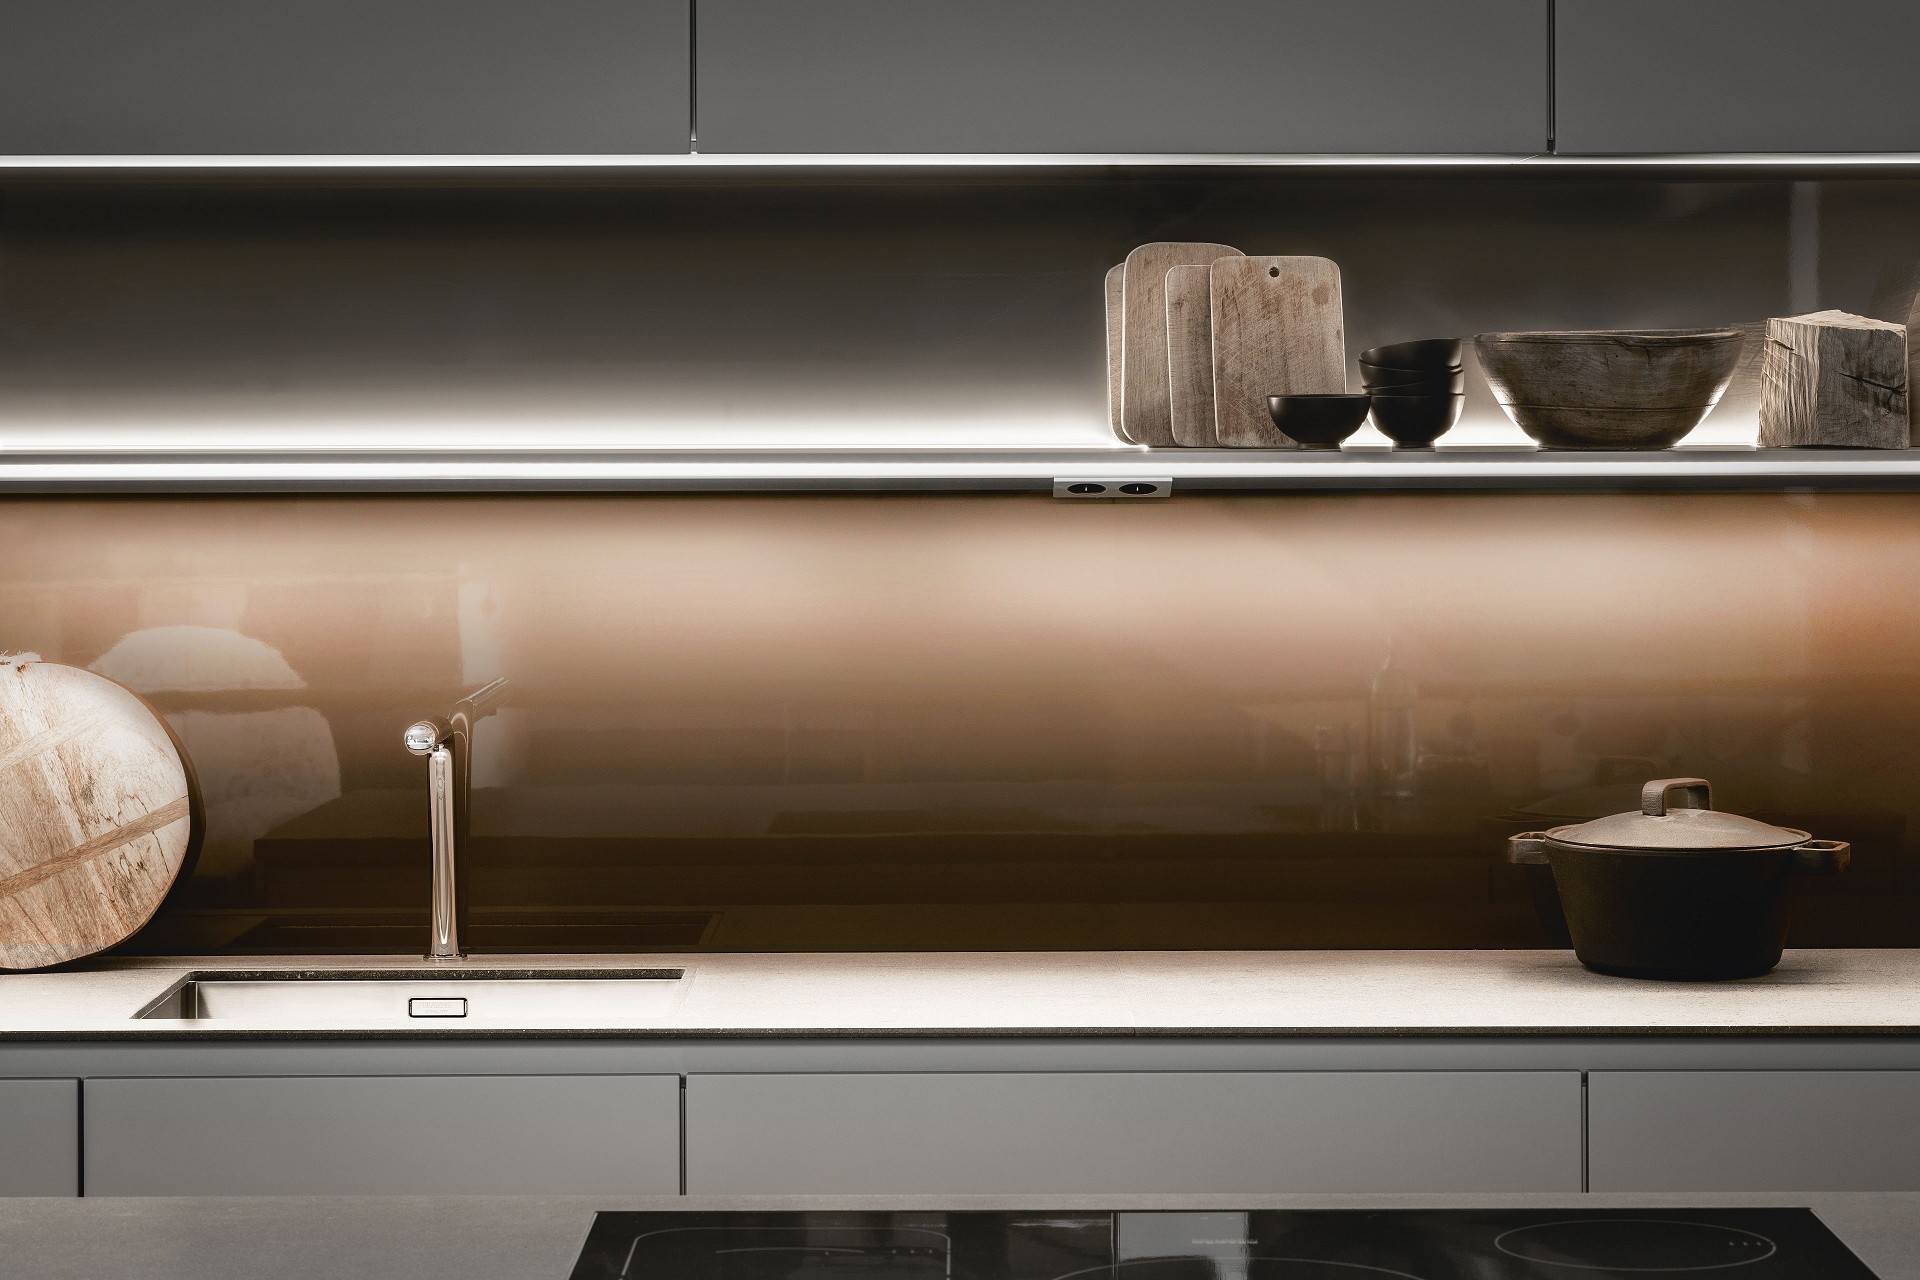 The SieMatic lighting rail offers, in addition to ideal task lighting, colorful mood lighting for the kitchen